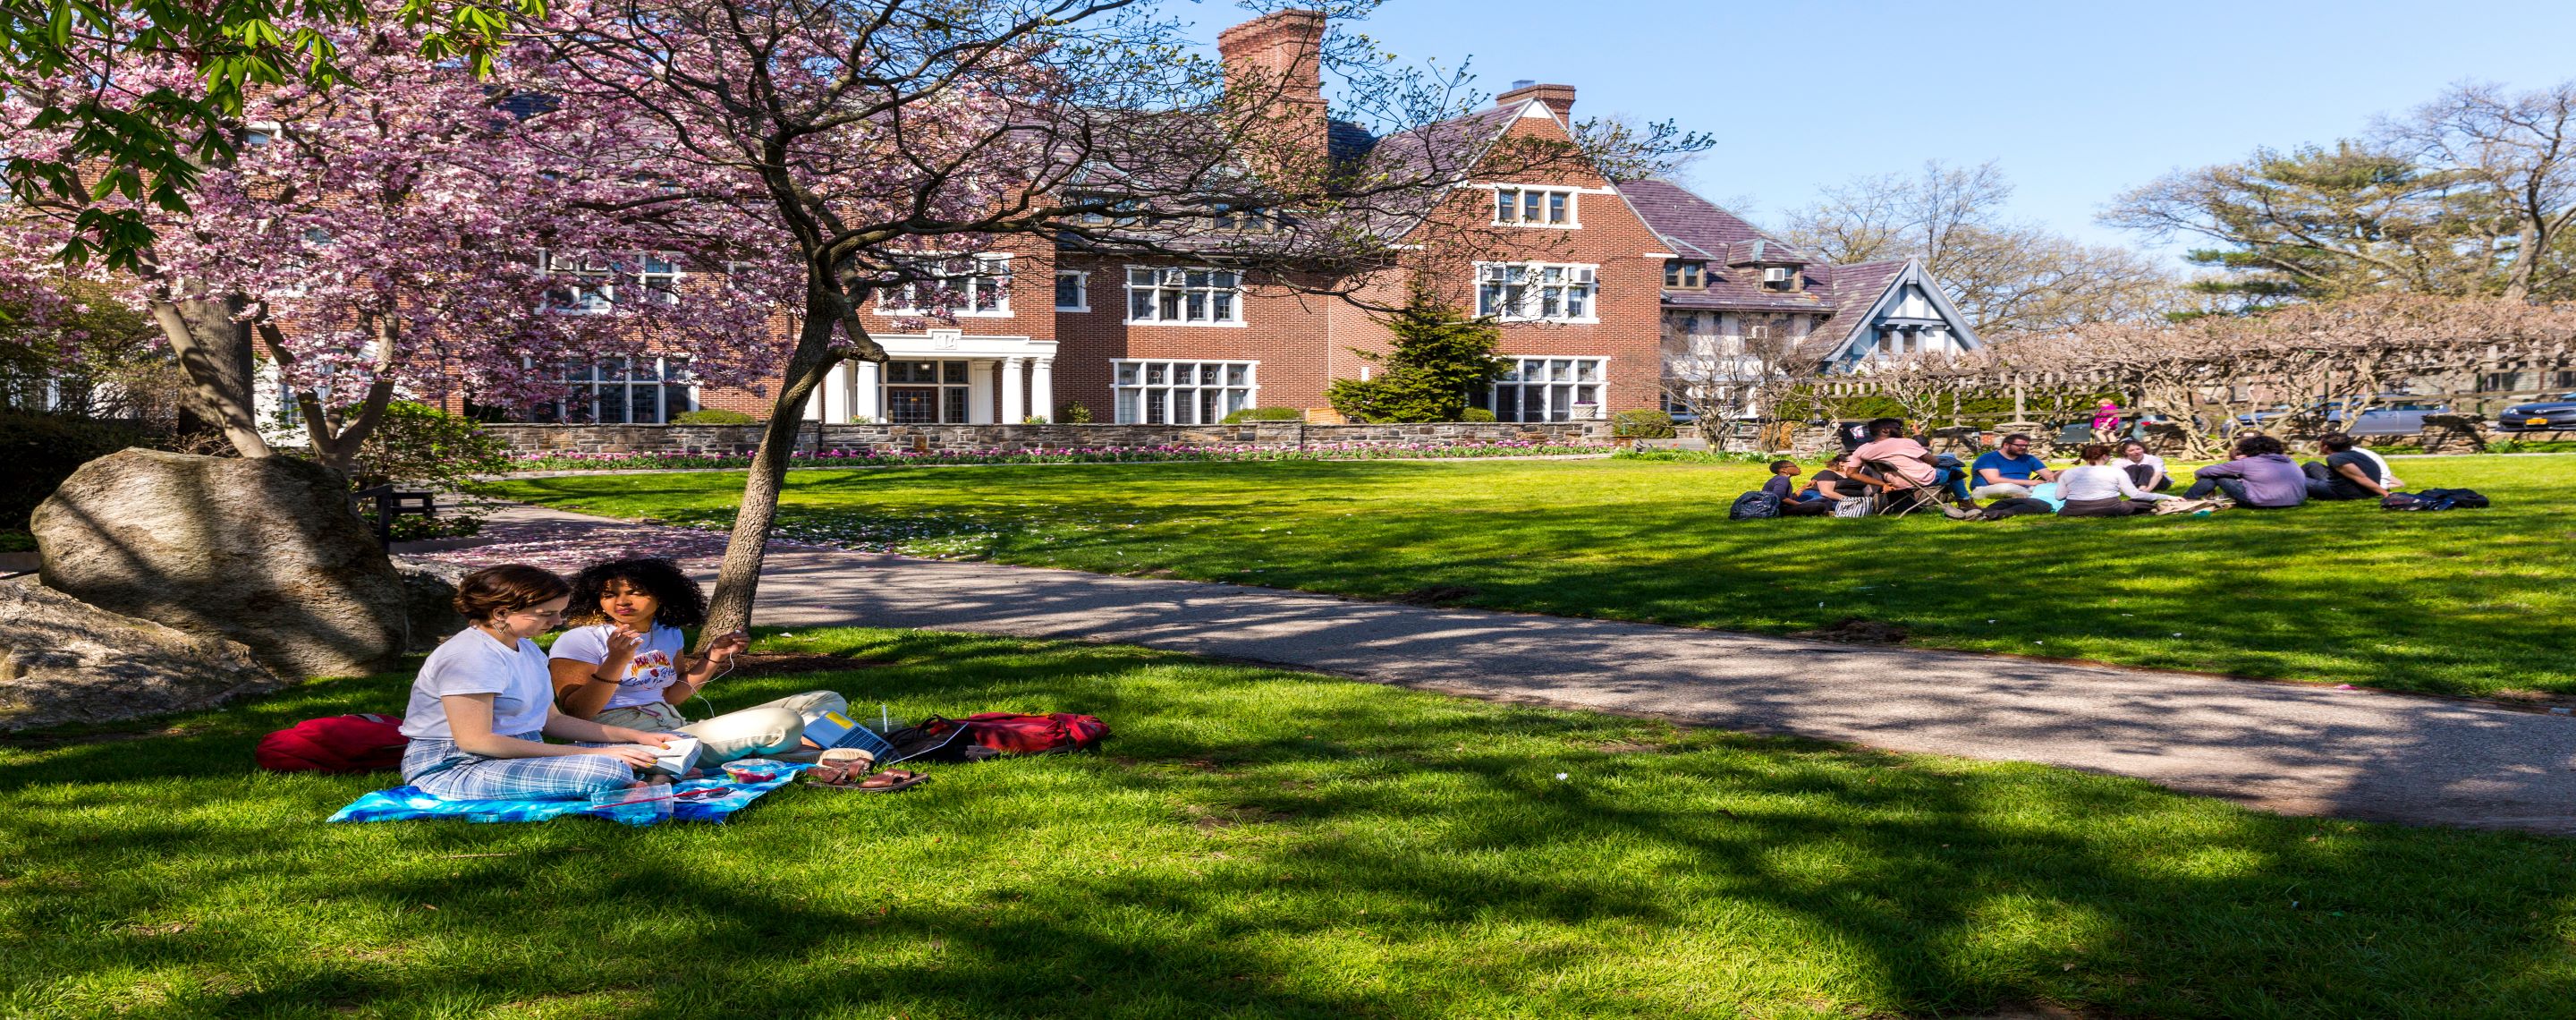 Apply To Sarah Lawrence College